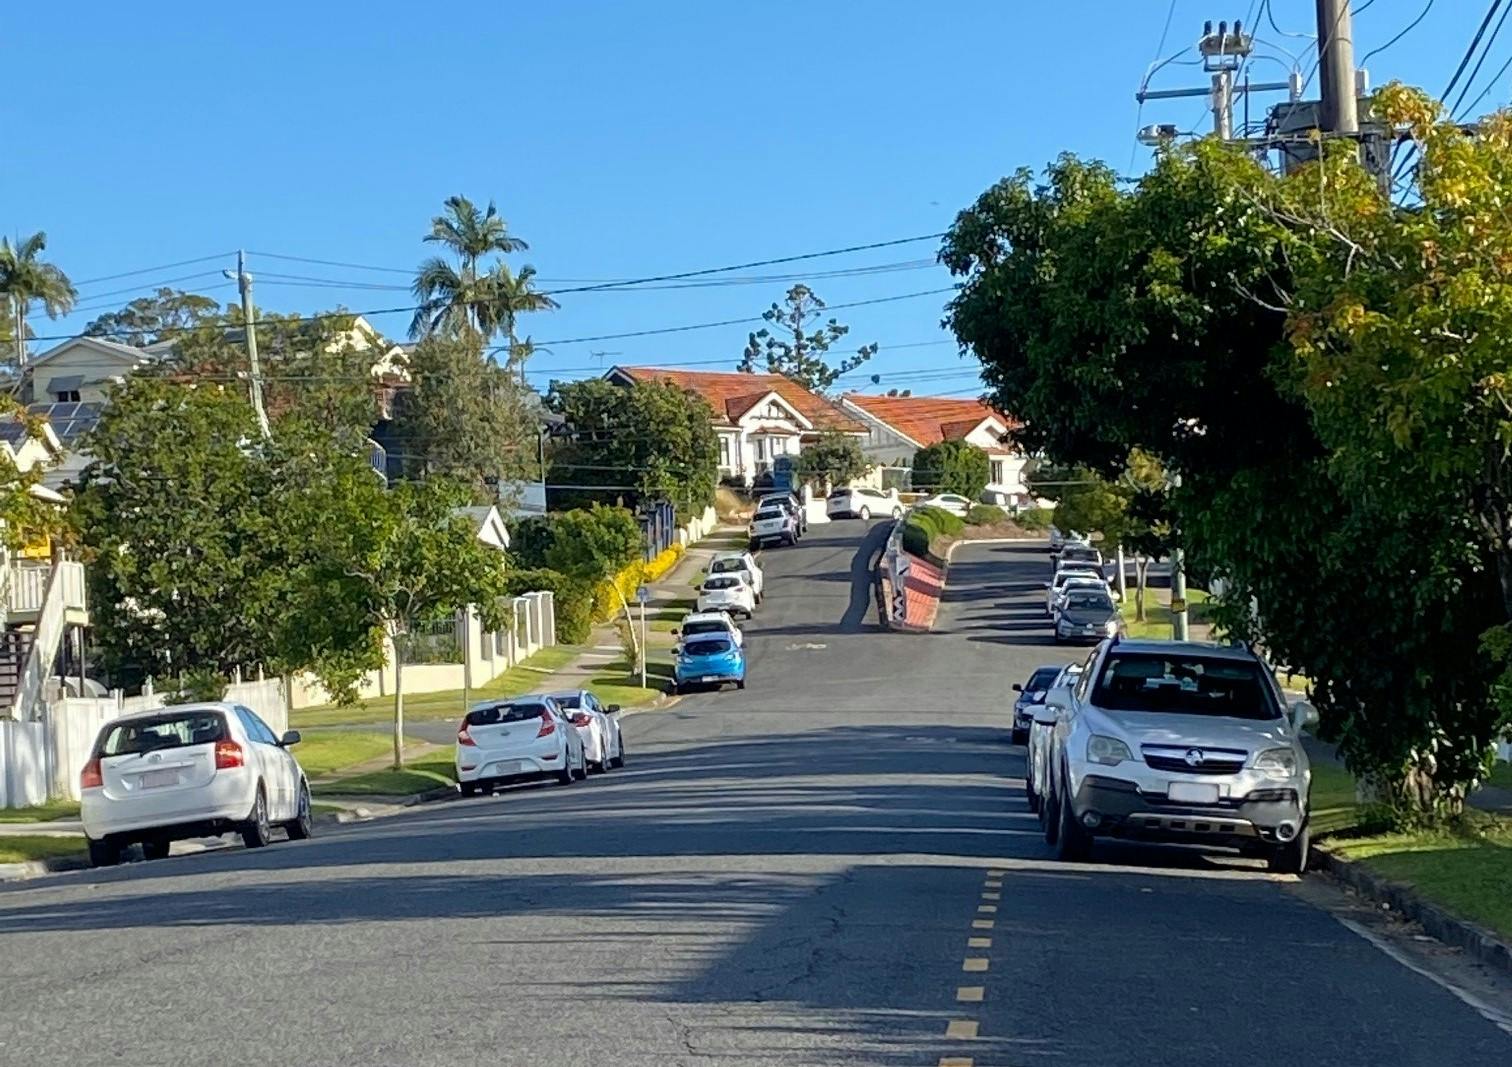 Photo of cars parked along both sides of Nicholson Street, Greenslopes